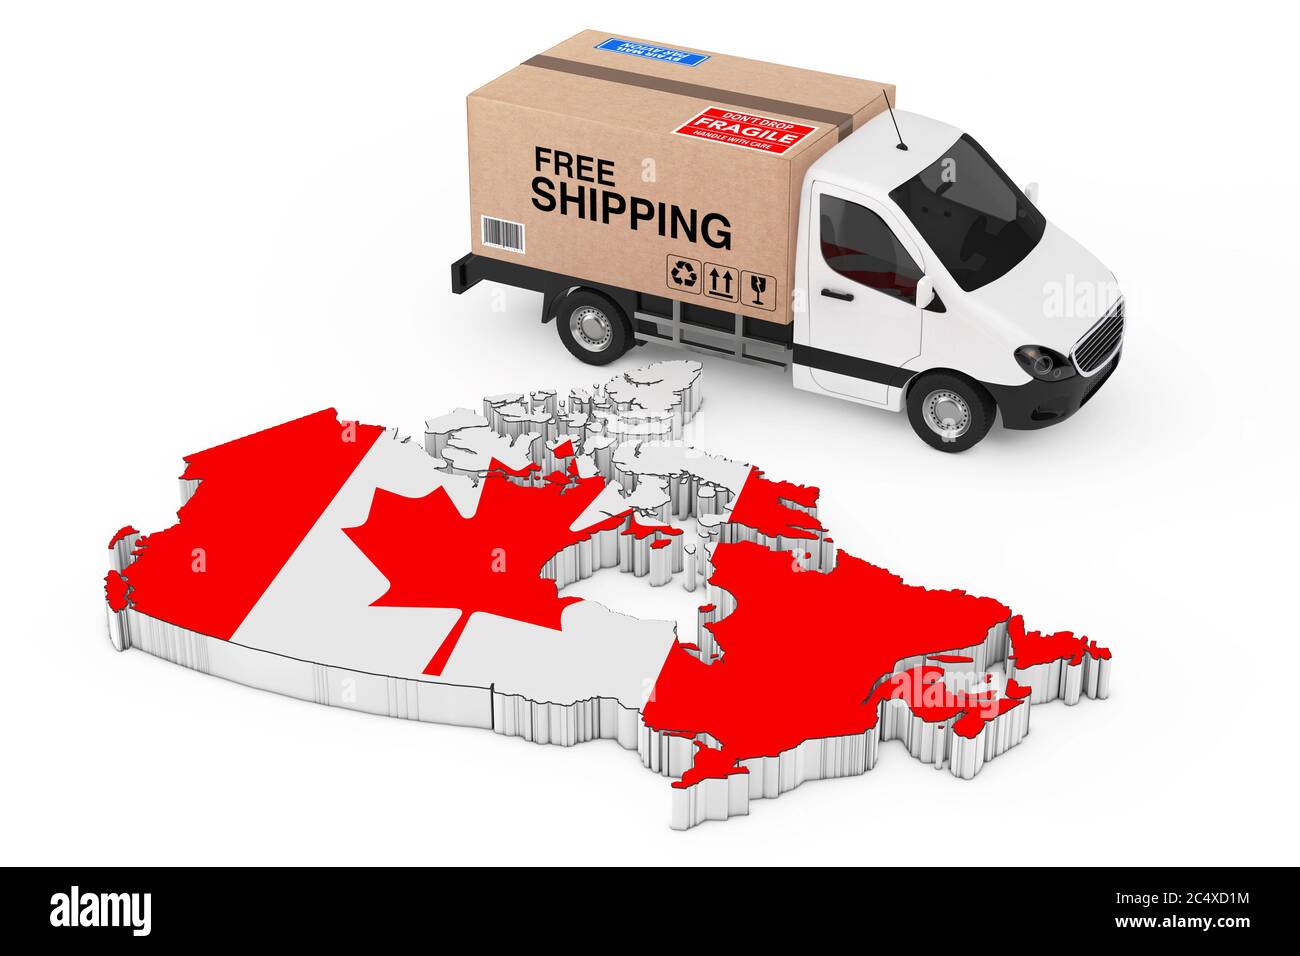 Canada Logistics Concept. White Commercial Industrial Cargo Delivery Van  Truck Loaded with Cardboard Box with Free Shipping Sign near Canada Map  with Stock Photo - Alamy